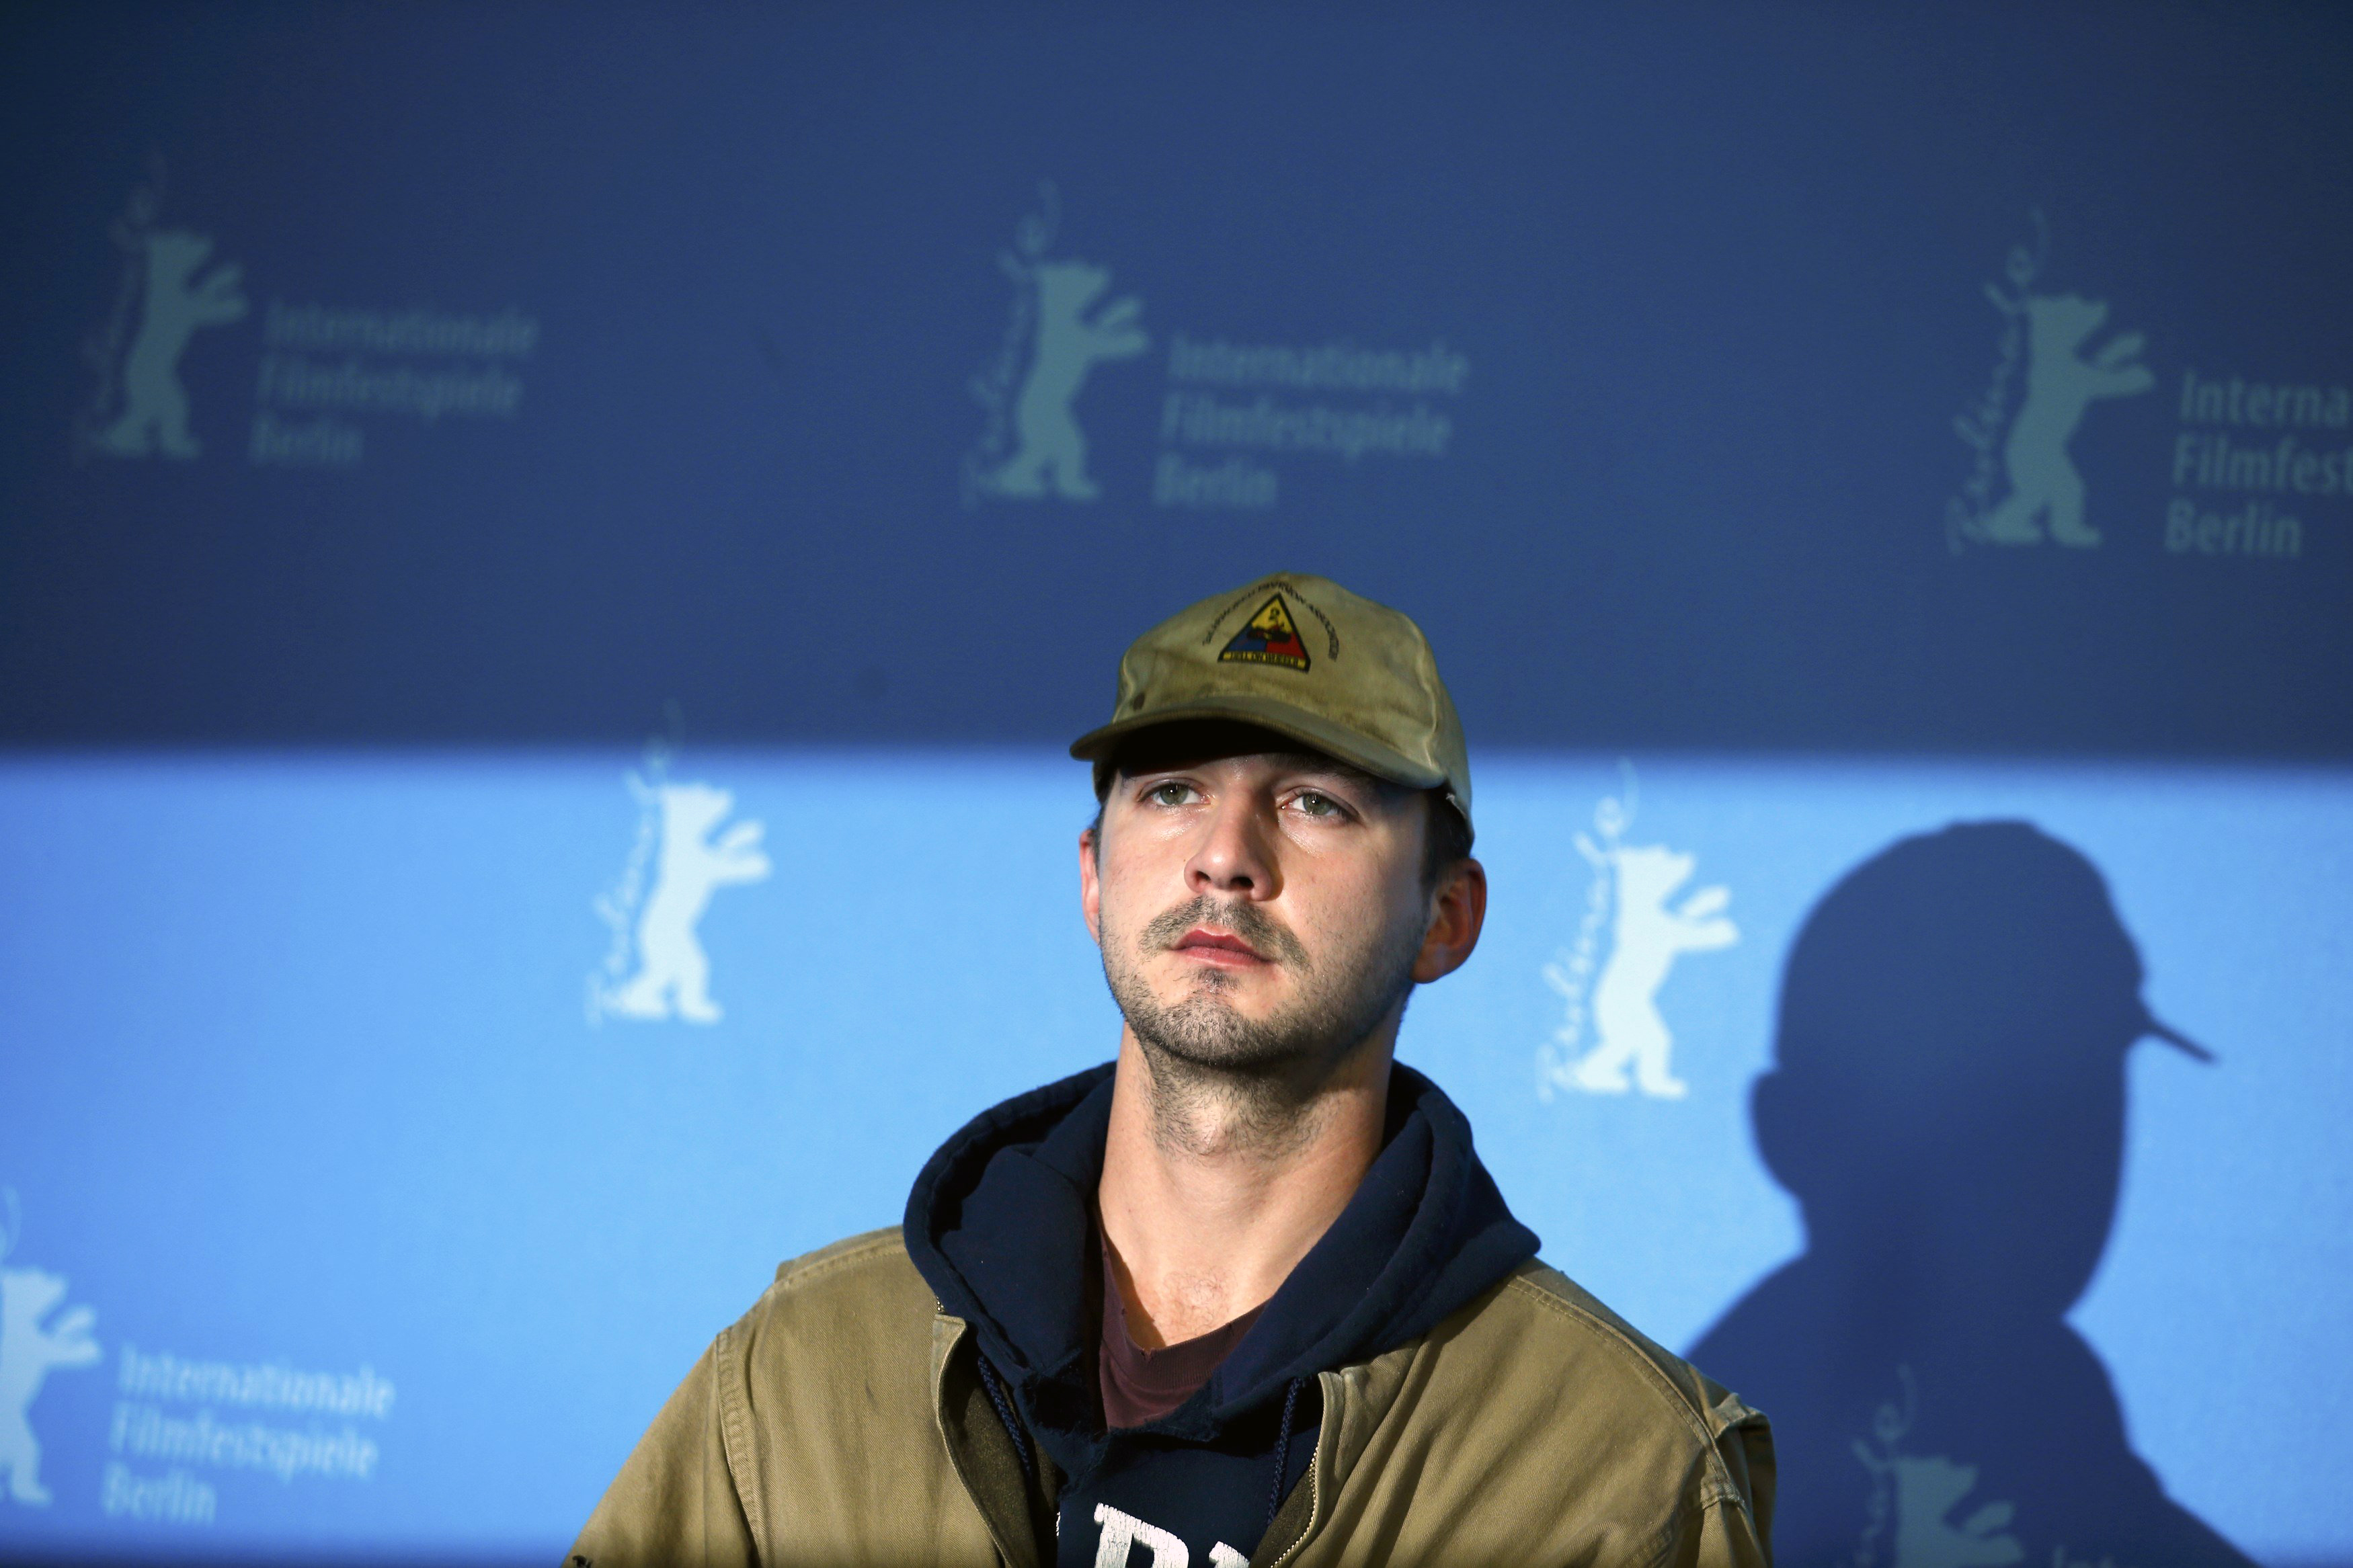 Cast member LaBeouf poses during a photocall to promote the movie "Nymphomaniac Volume I" during the 64th Berlinale International Film Festival in Berlin